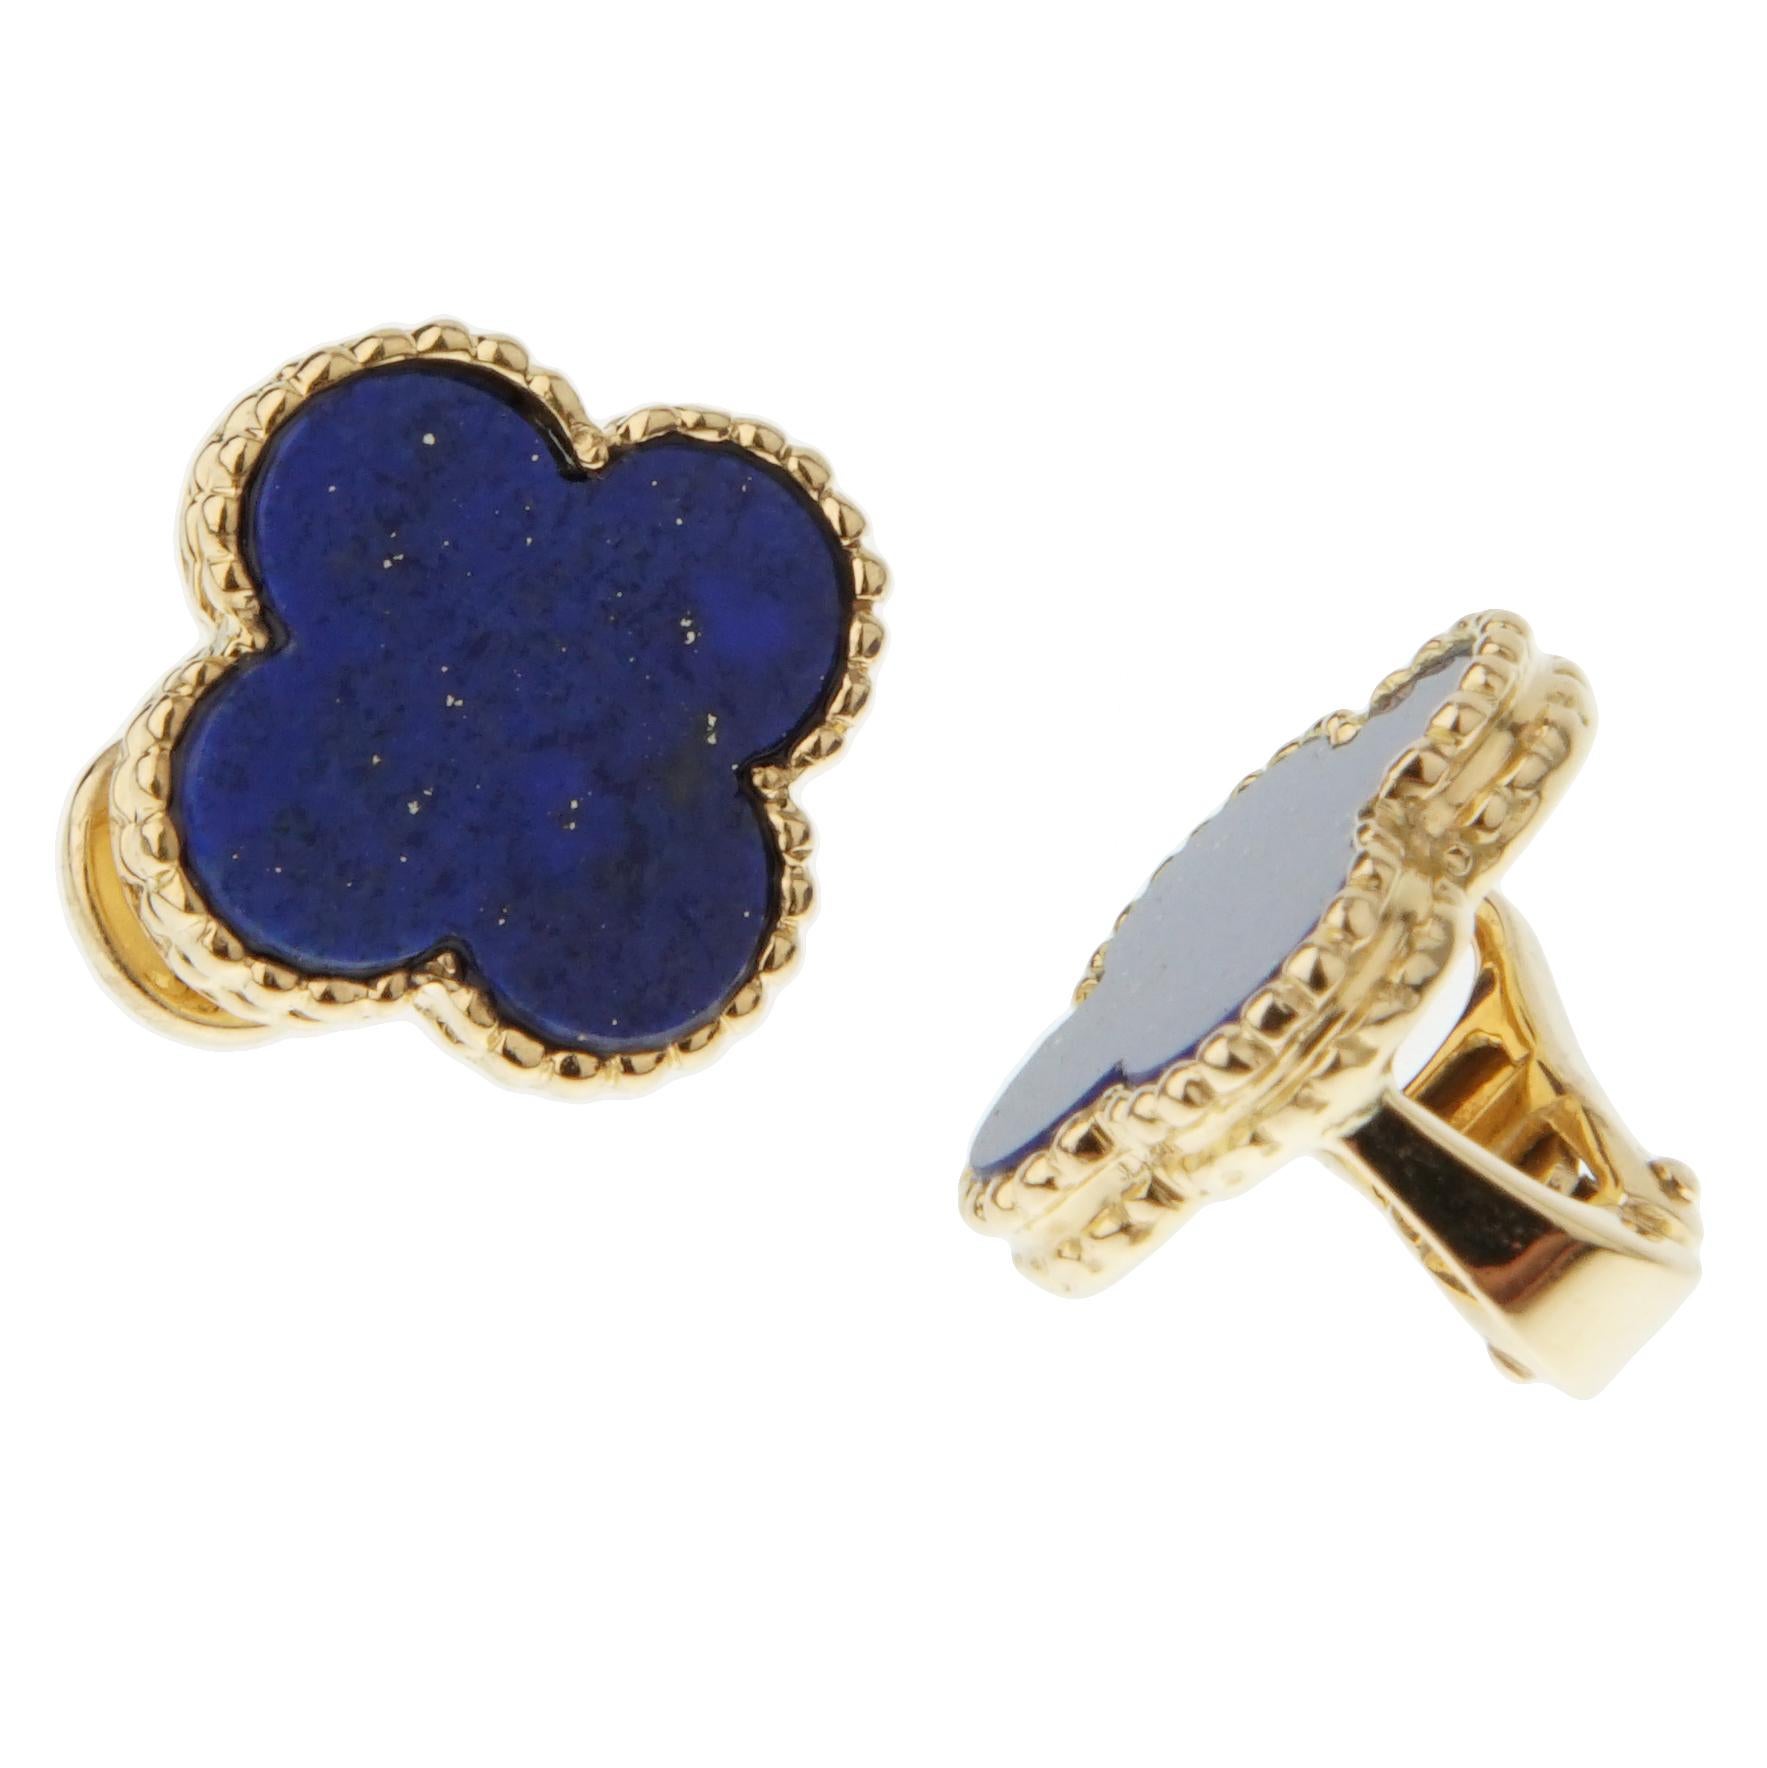 An incredibly rare set of vintage alhambra earrings by Van Cleef & Arpels showcasing 2 wonderful lapis stones set in the iconic alhambra motif in 18k yellow gold.